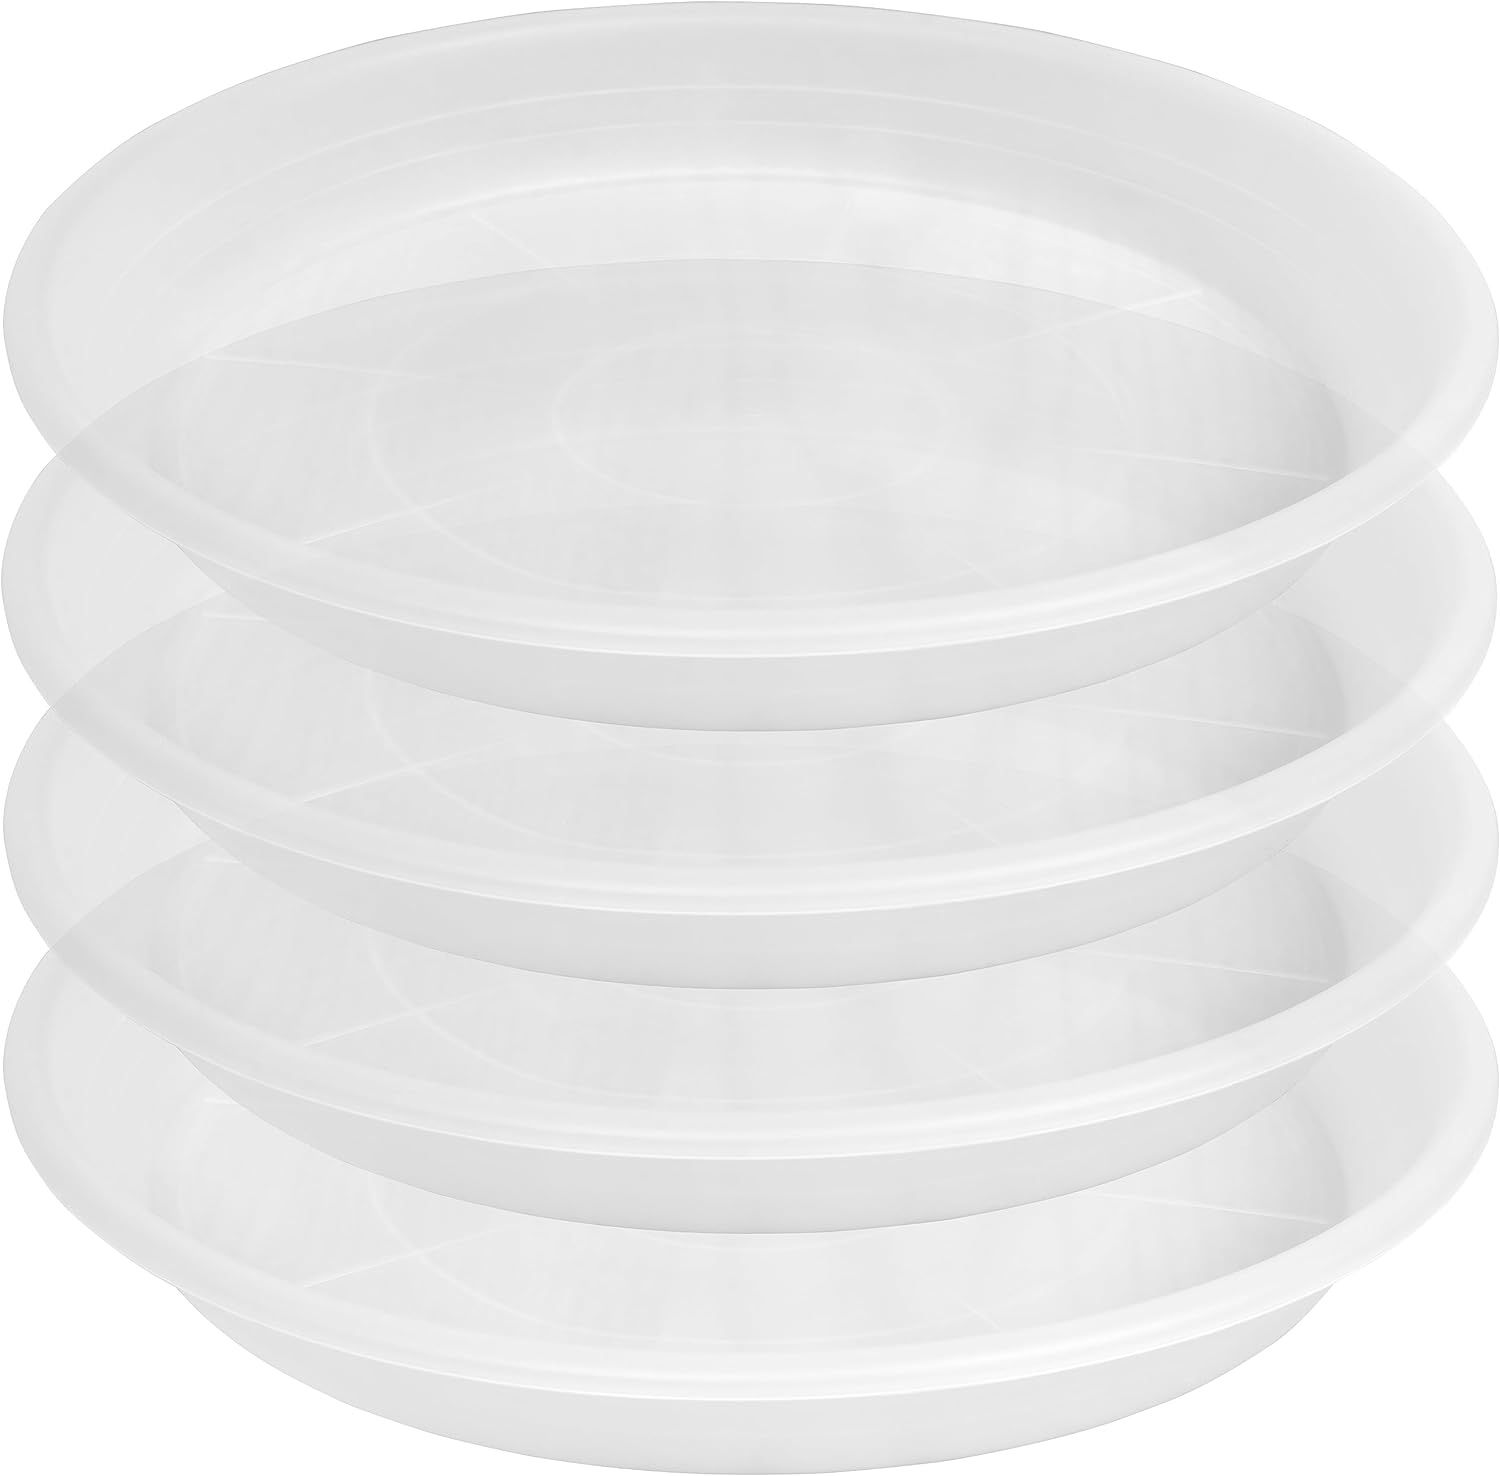 SAUCERHOME 4 Packs Plant Saucer Pot Tray 6 8 10 12 14 16 19 20 Inch Plastic Flower Planter Saucers and Drip Trays for Indoors Outdoors, Heavy Durable 